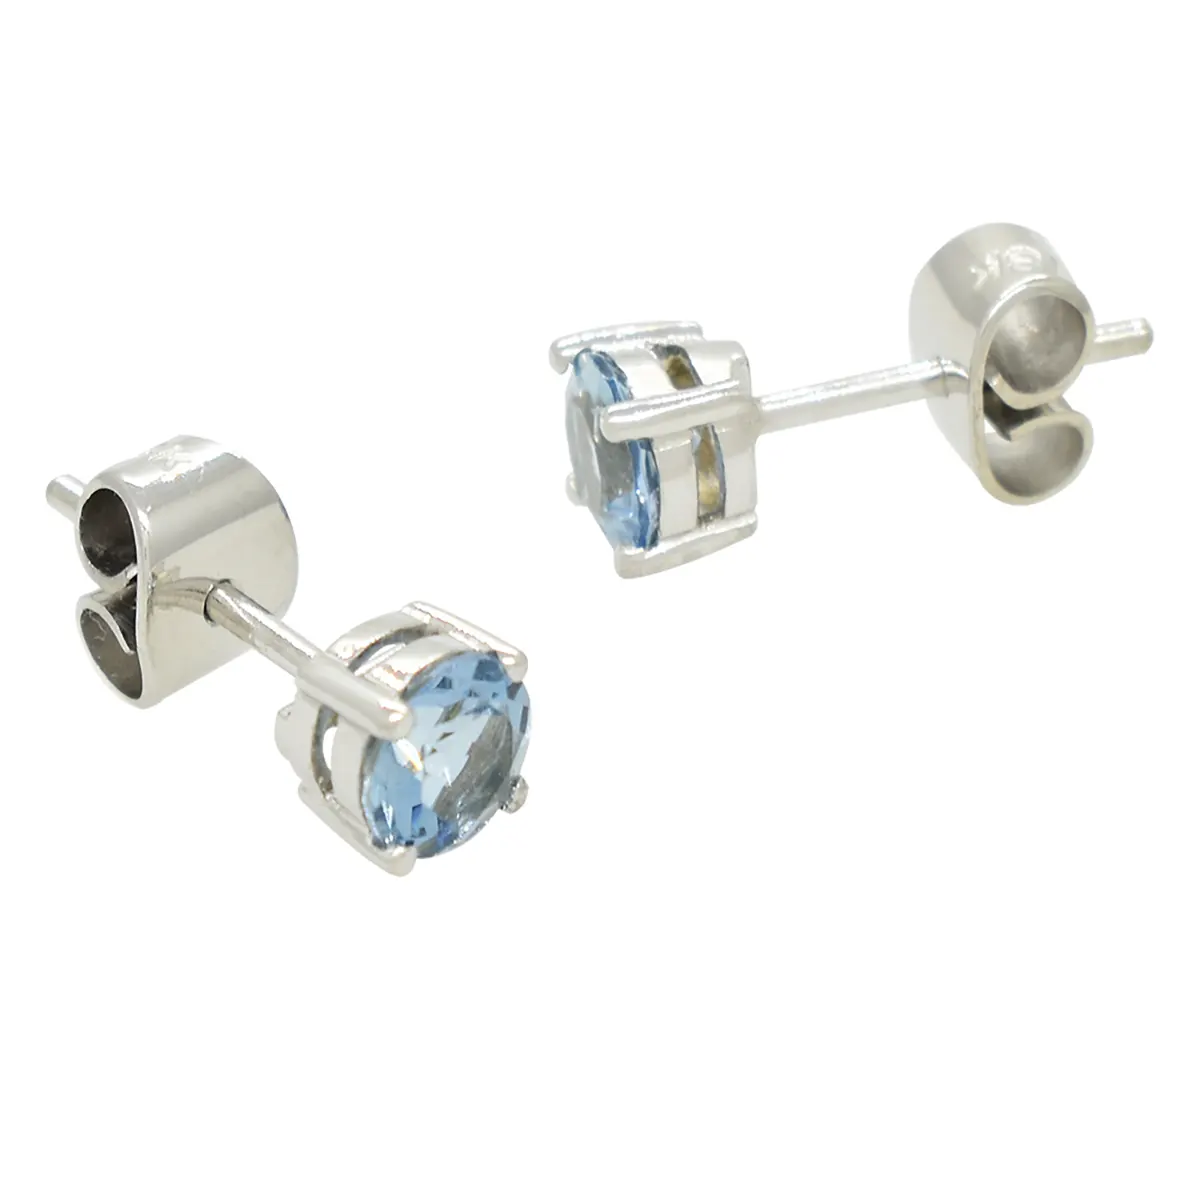 classic-stud-earrings-with-round-aquamarines-in-18k-white-gold